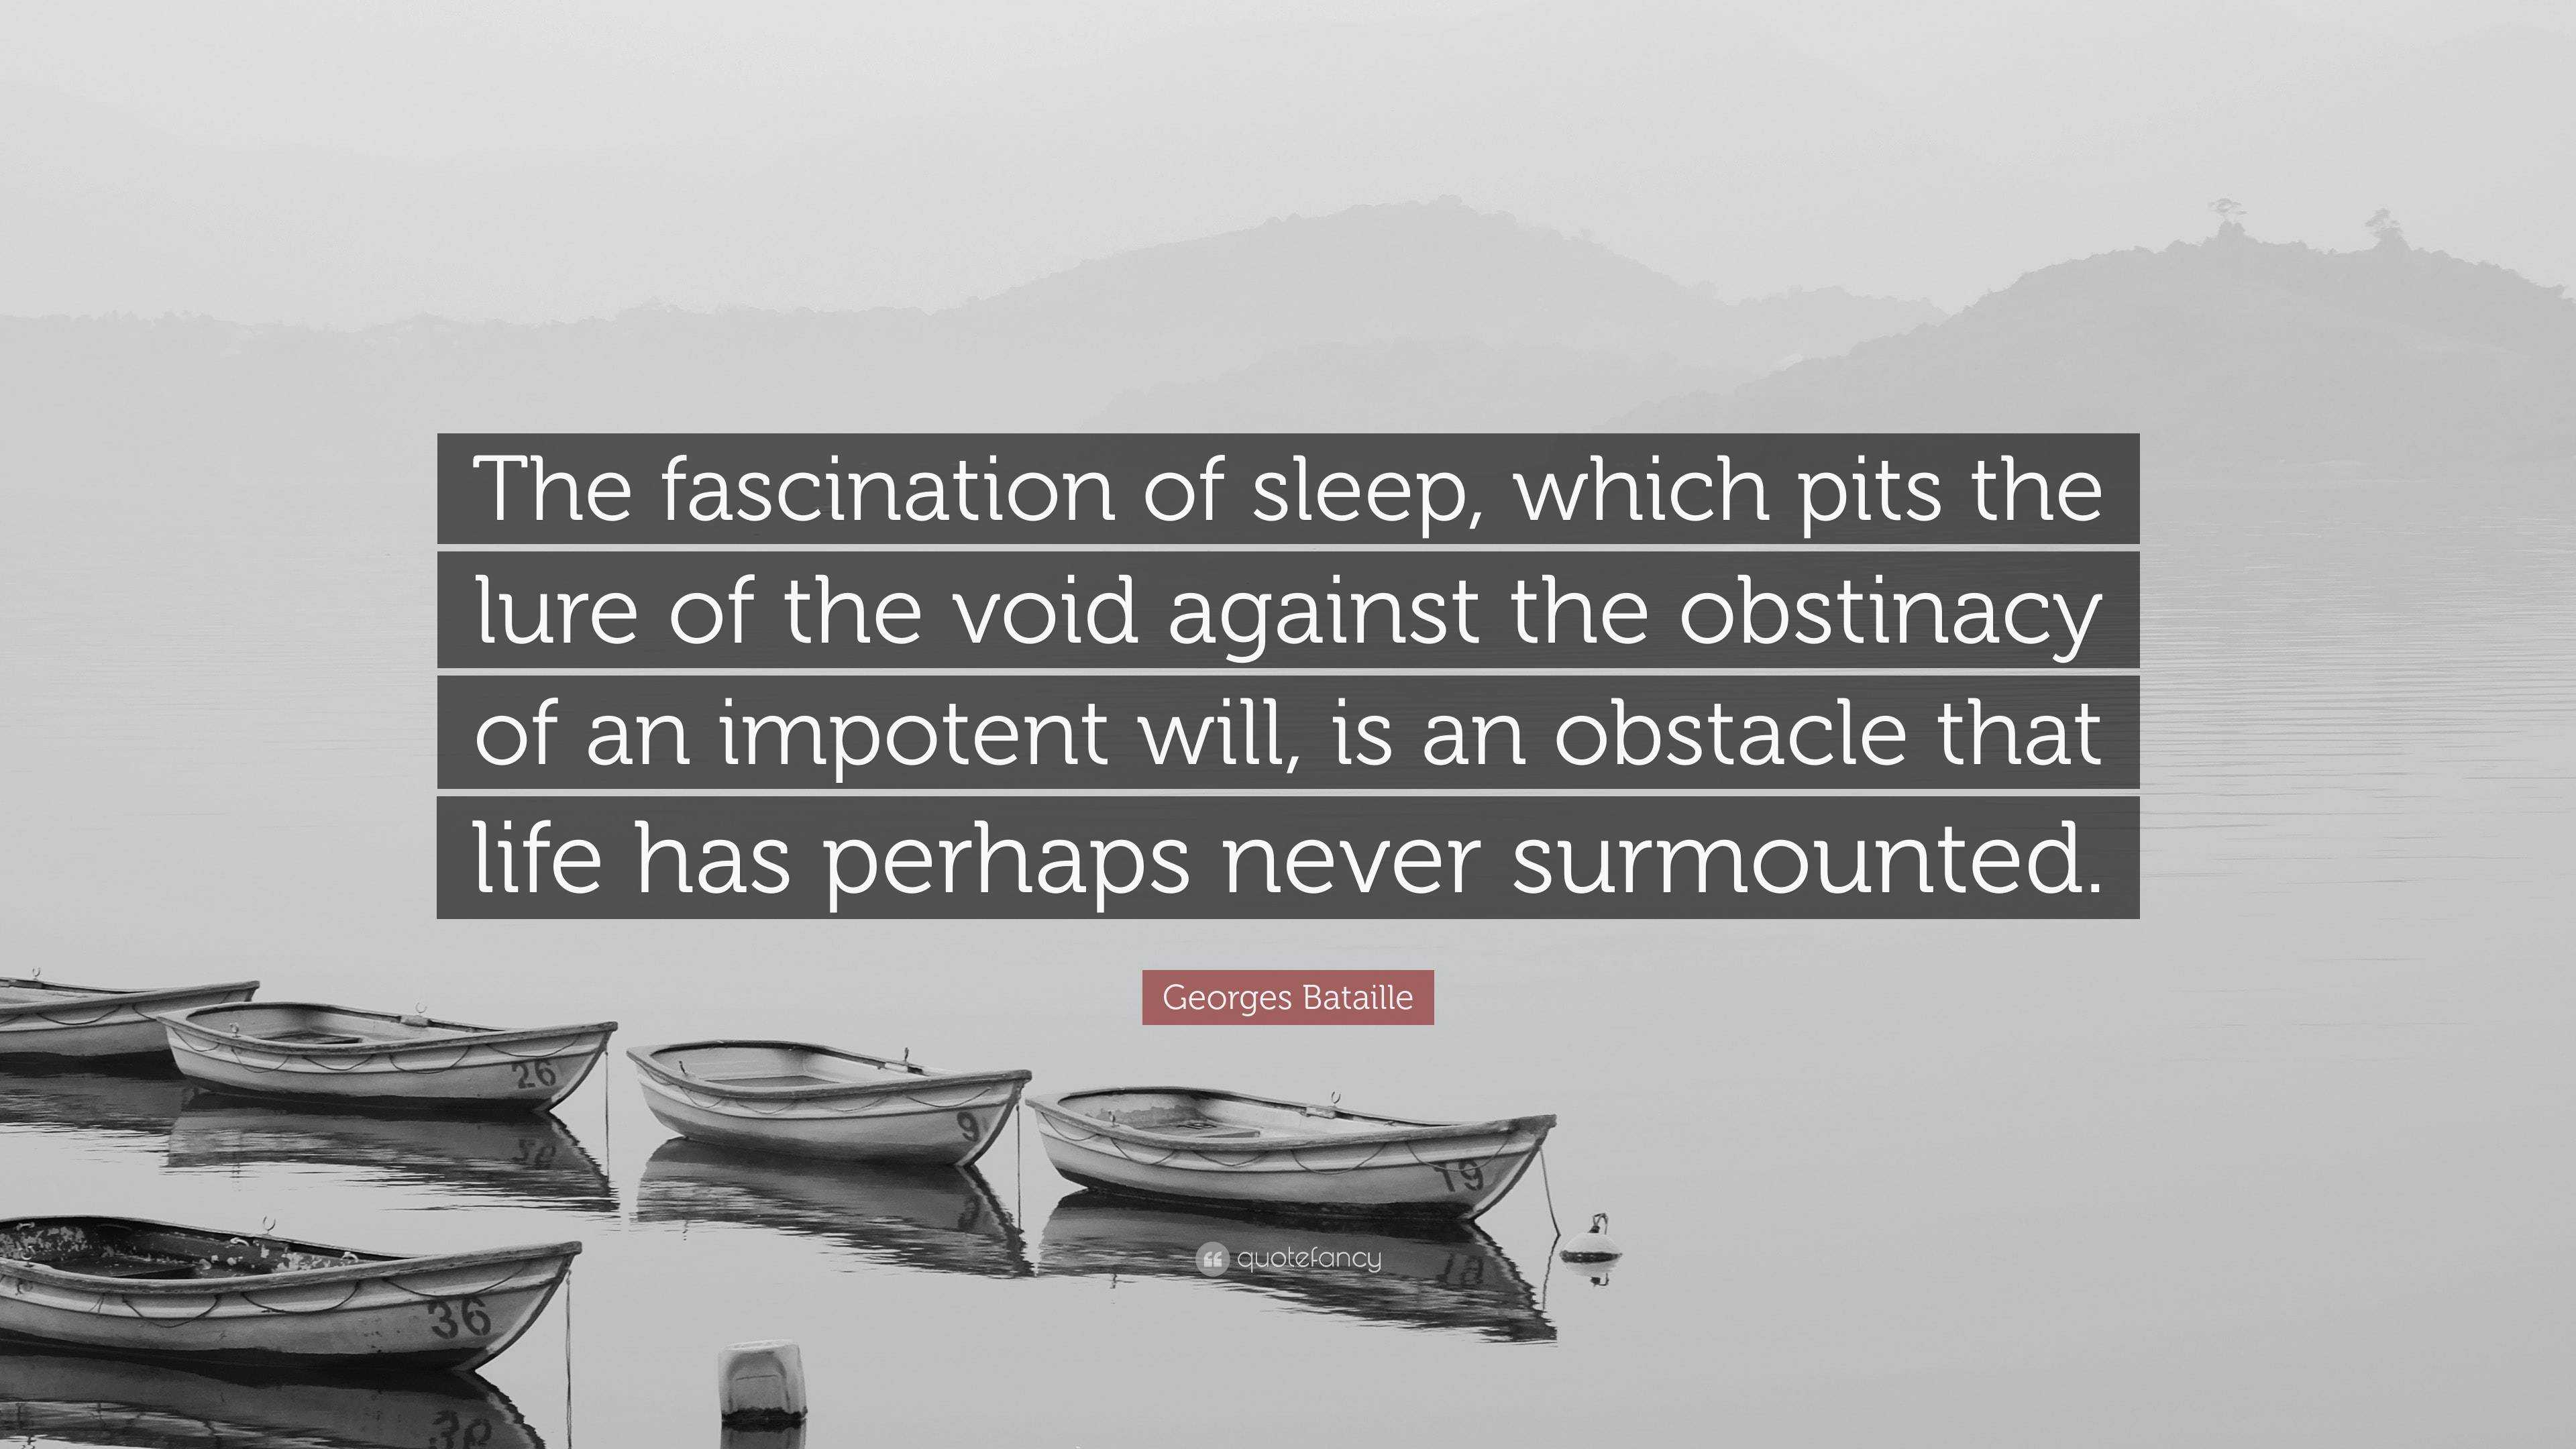 https://quotefancy.com/media/wallpaper/3840x2160/6411074-Georges-Bataille-Quote-The-fascination-of-sleep-which-pits-the.jpg